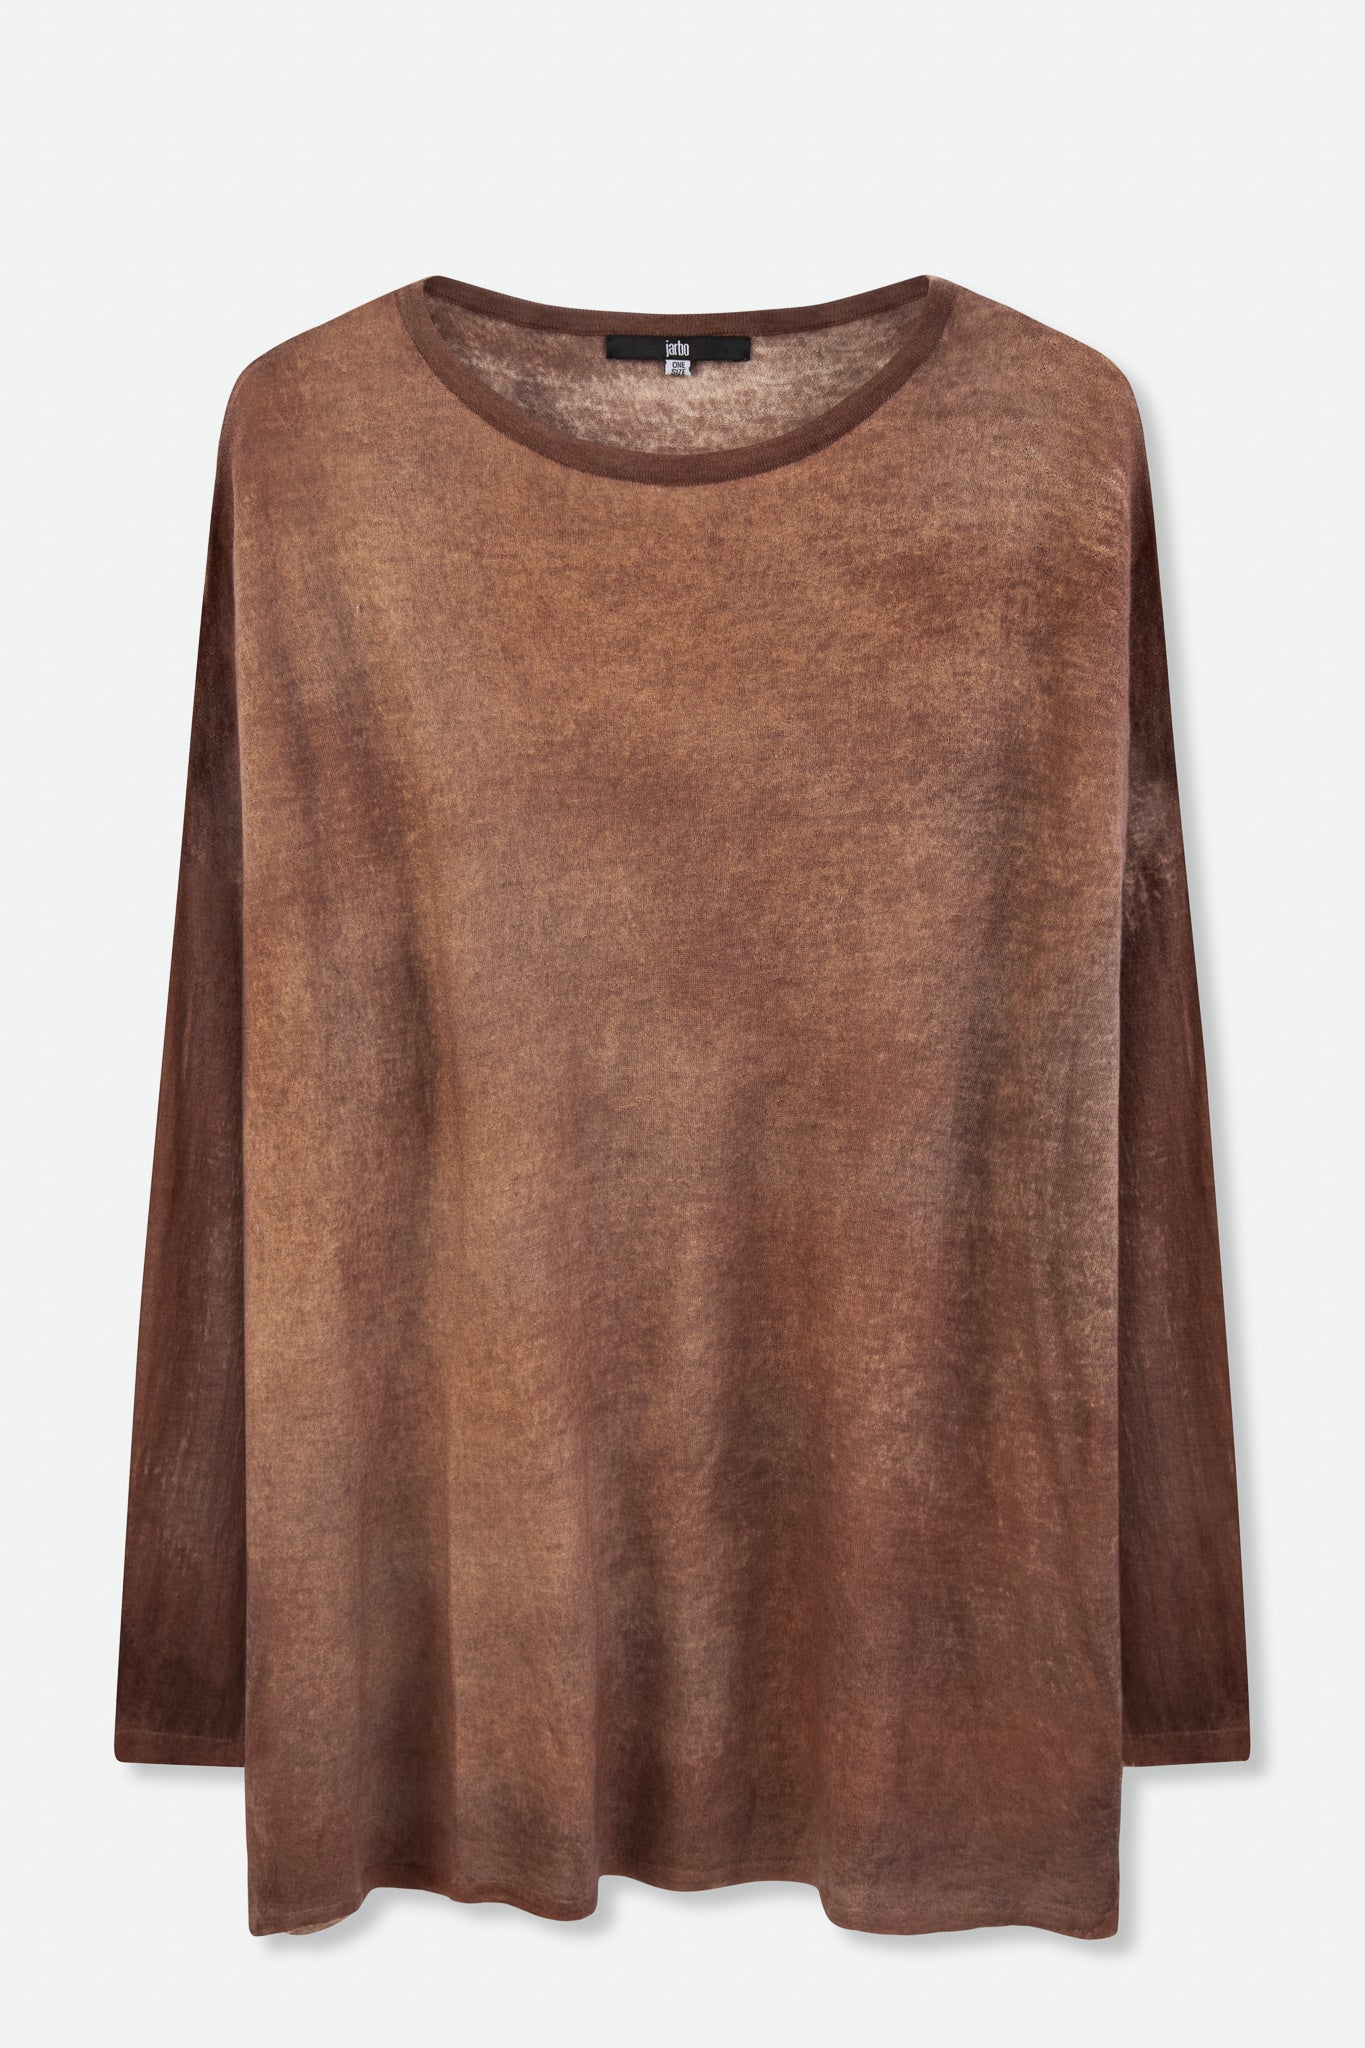 SANTANA OPEN-NECK ONE-SIZE TOP IN HAND-DYED CASHMERE CLAY